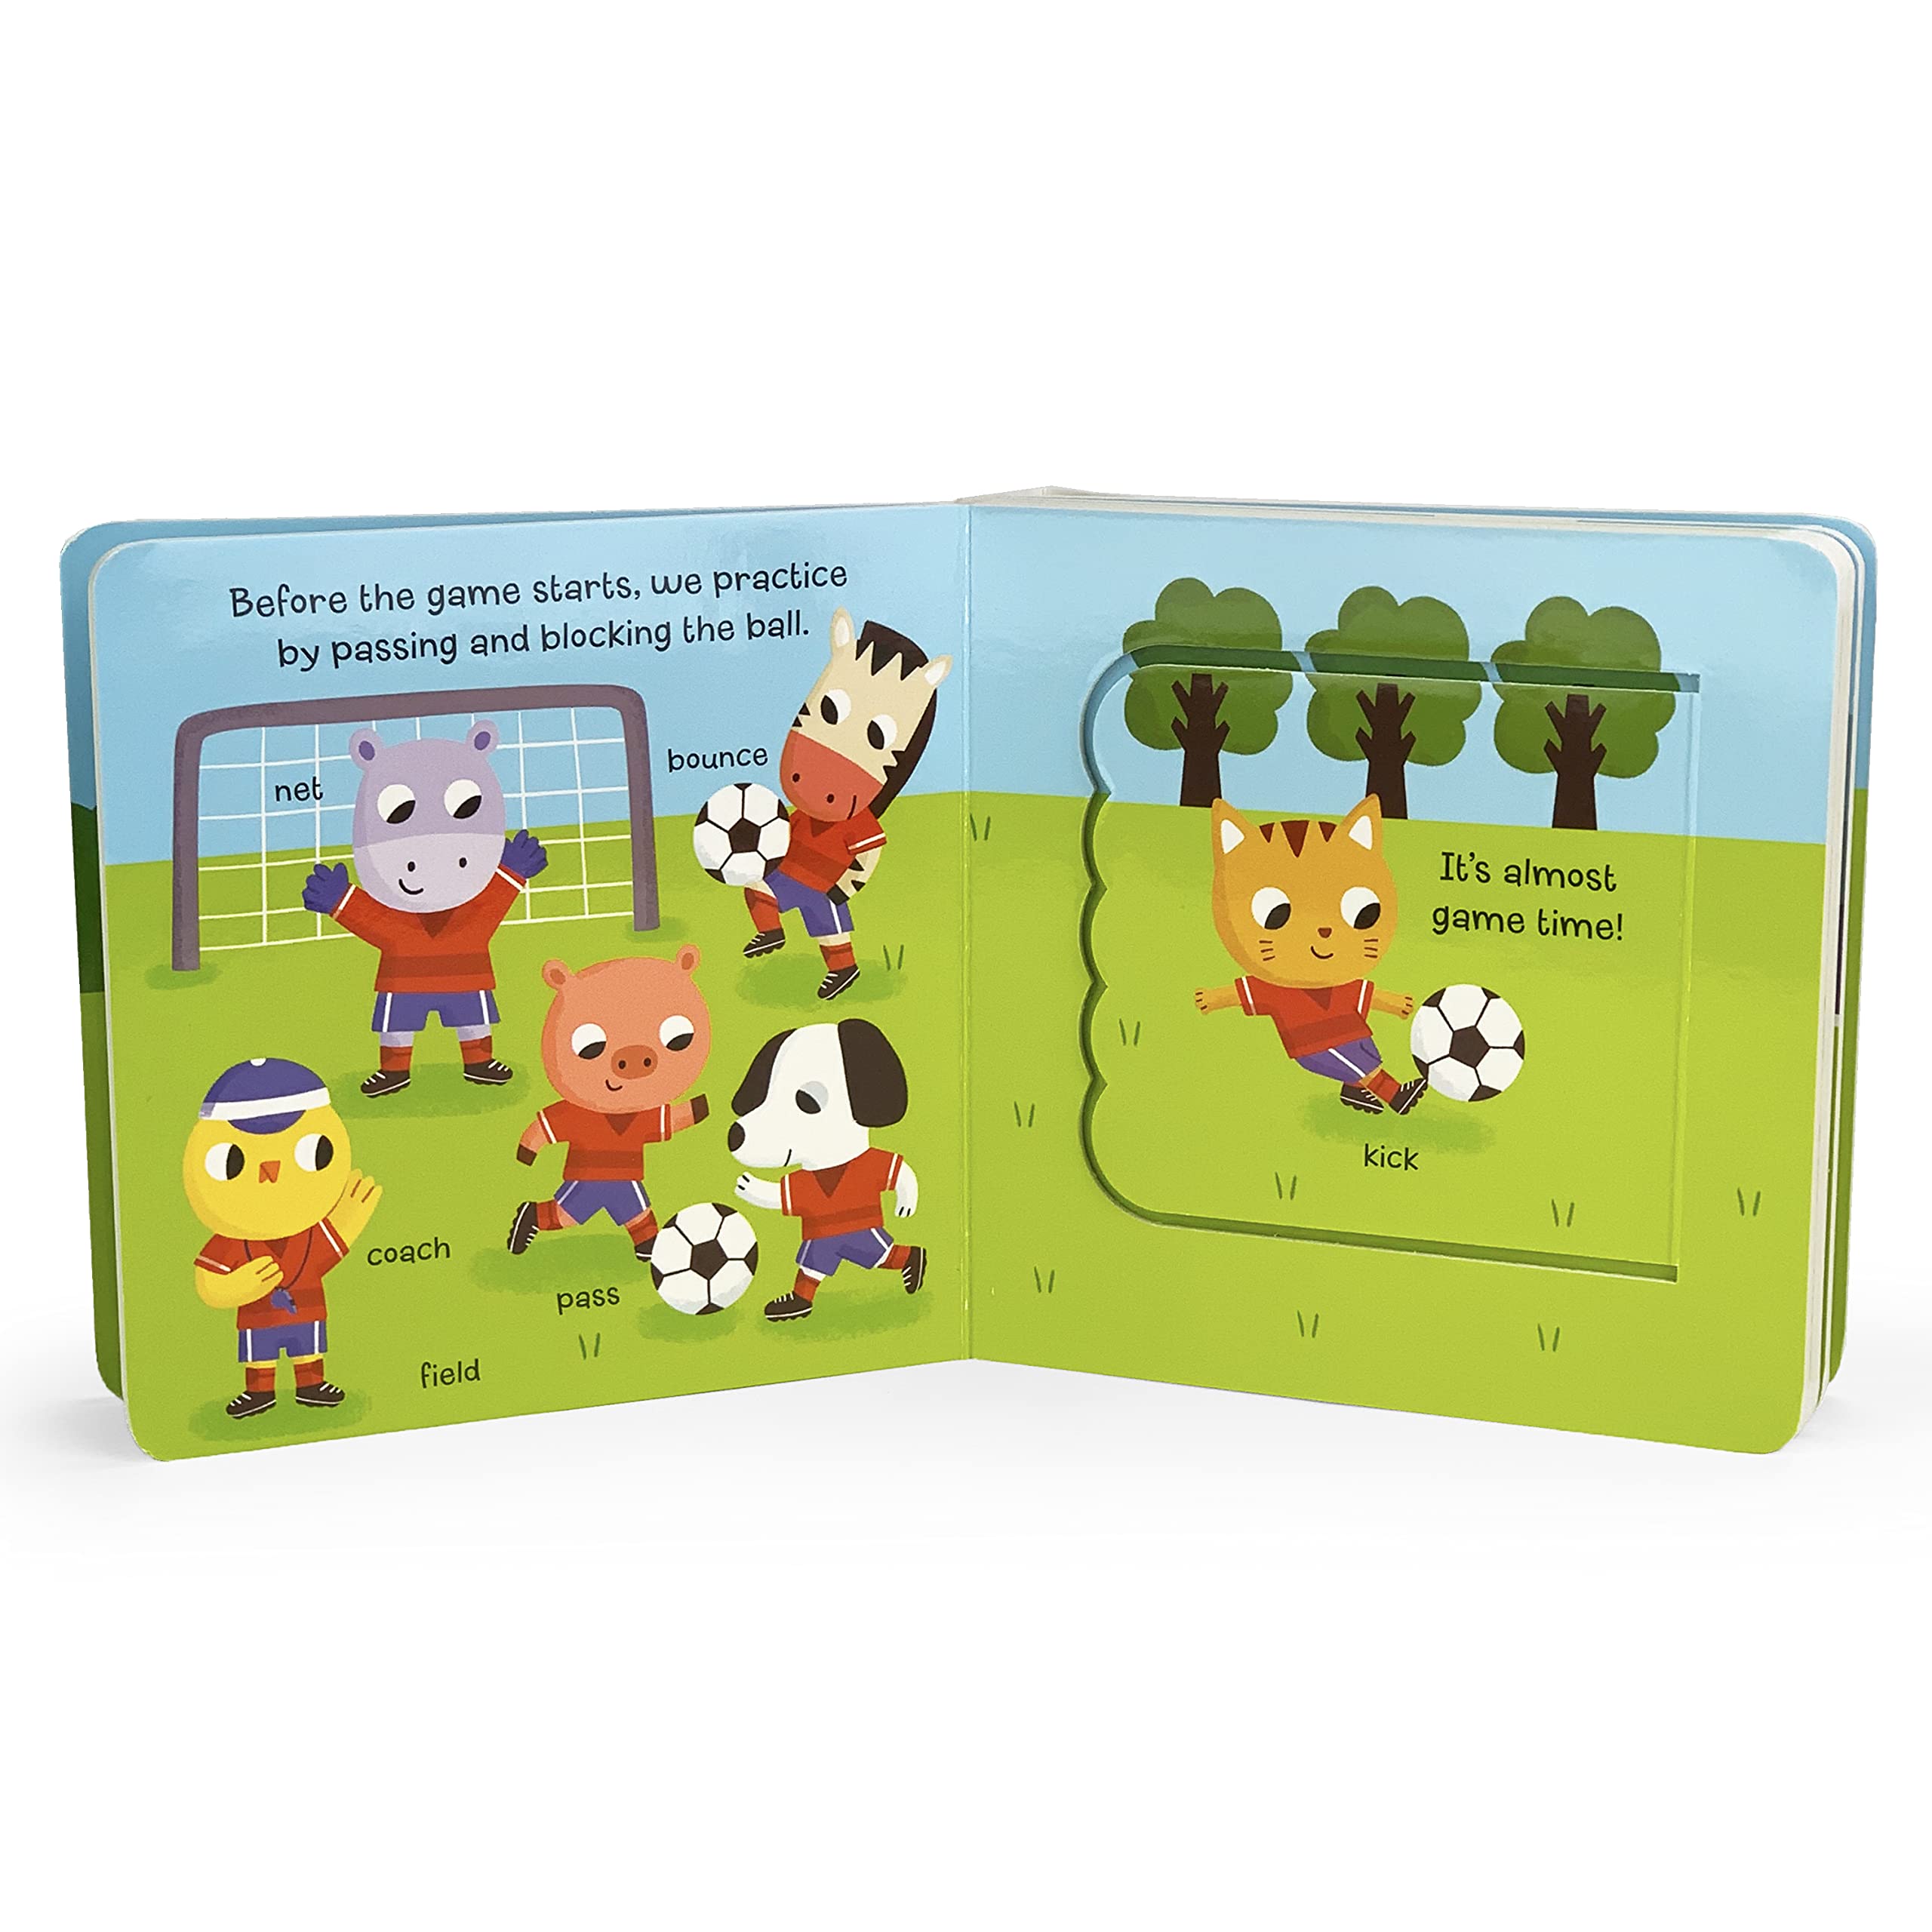 Let's Play Soccer! A Lift-a-Flap Board Book for Babies and Toddlers, Ages 1-4 (Children's Interactive Chunky Lift-A-Flap Board Book)